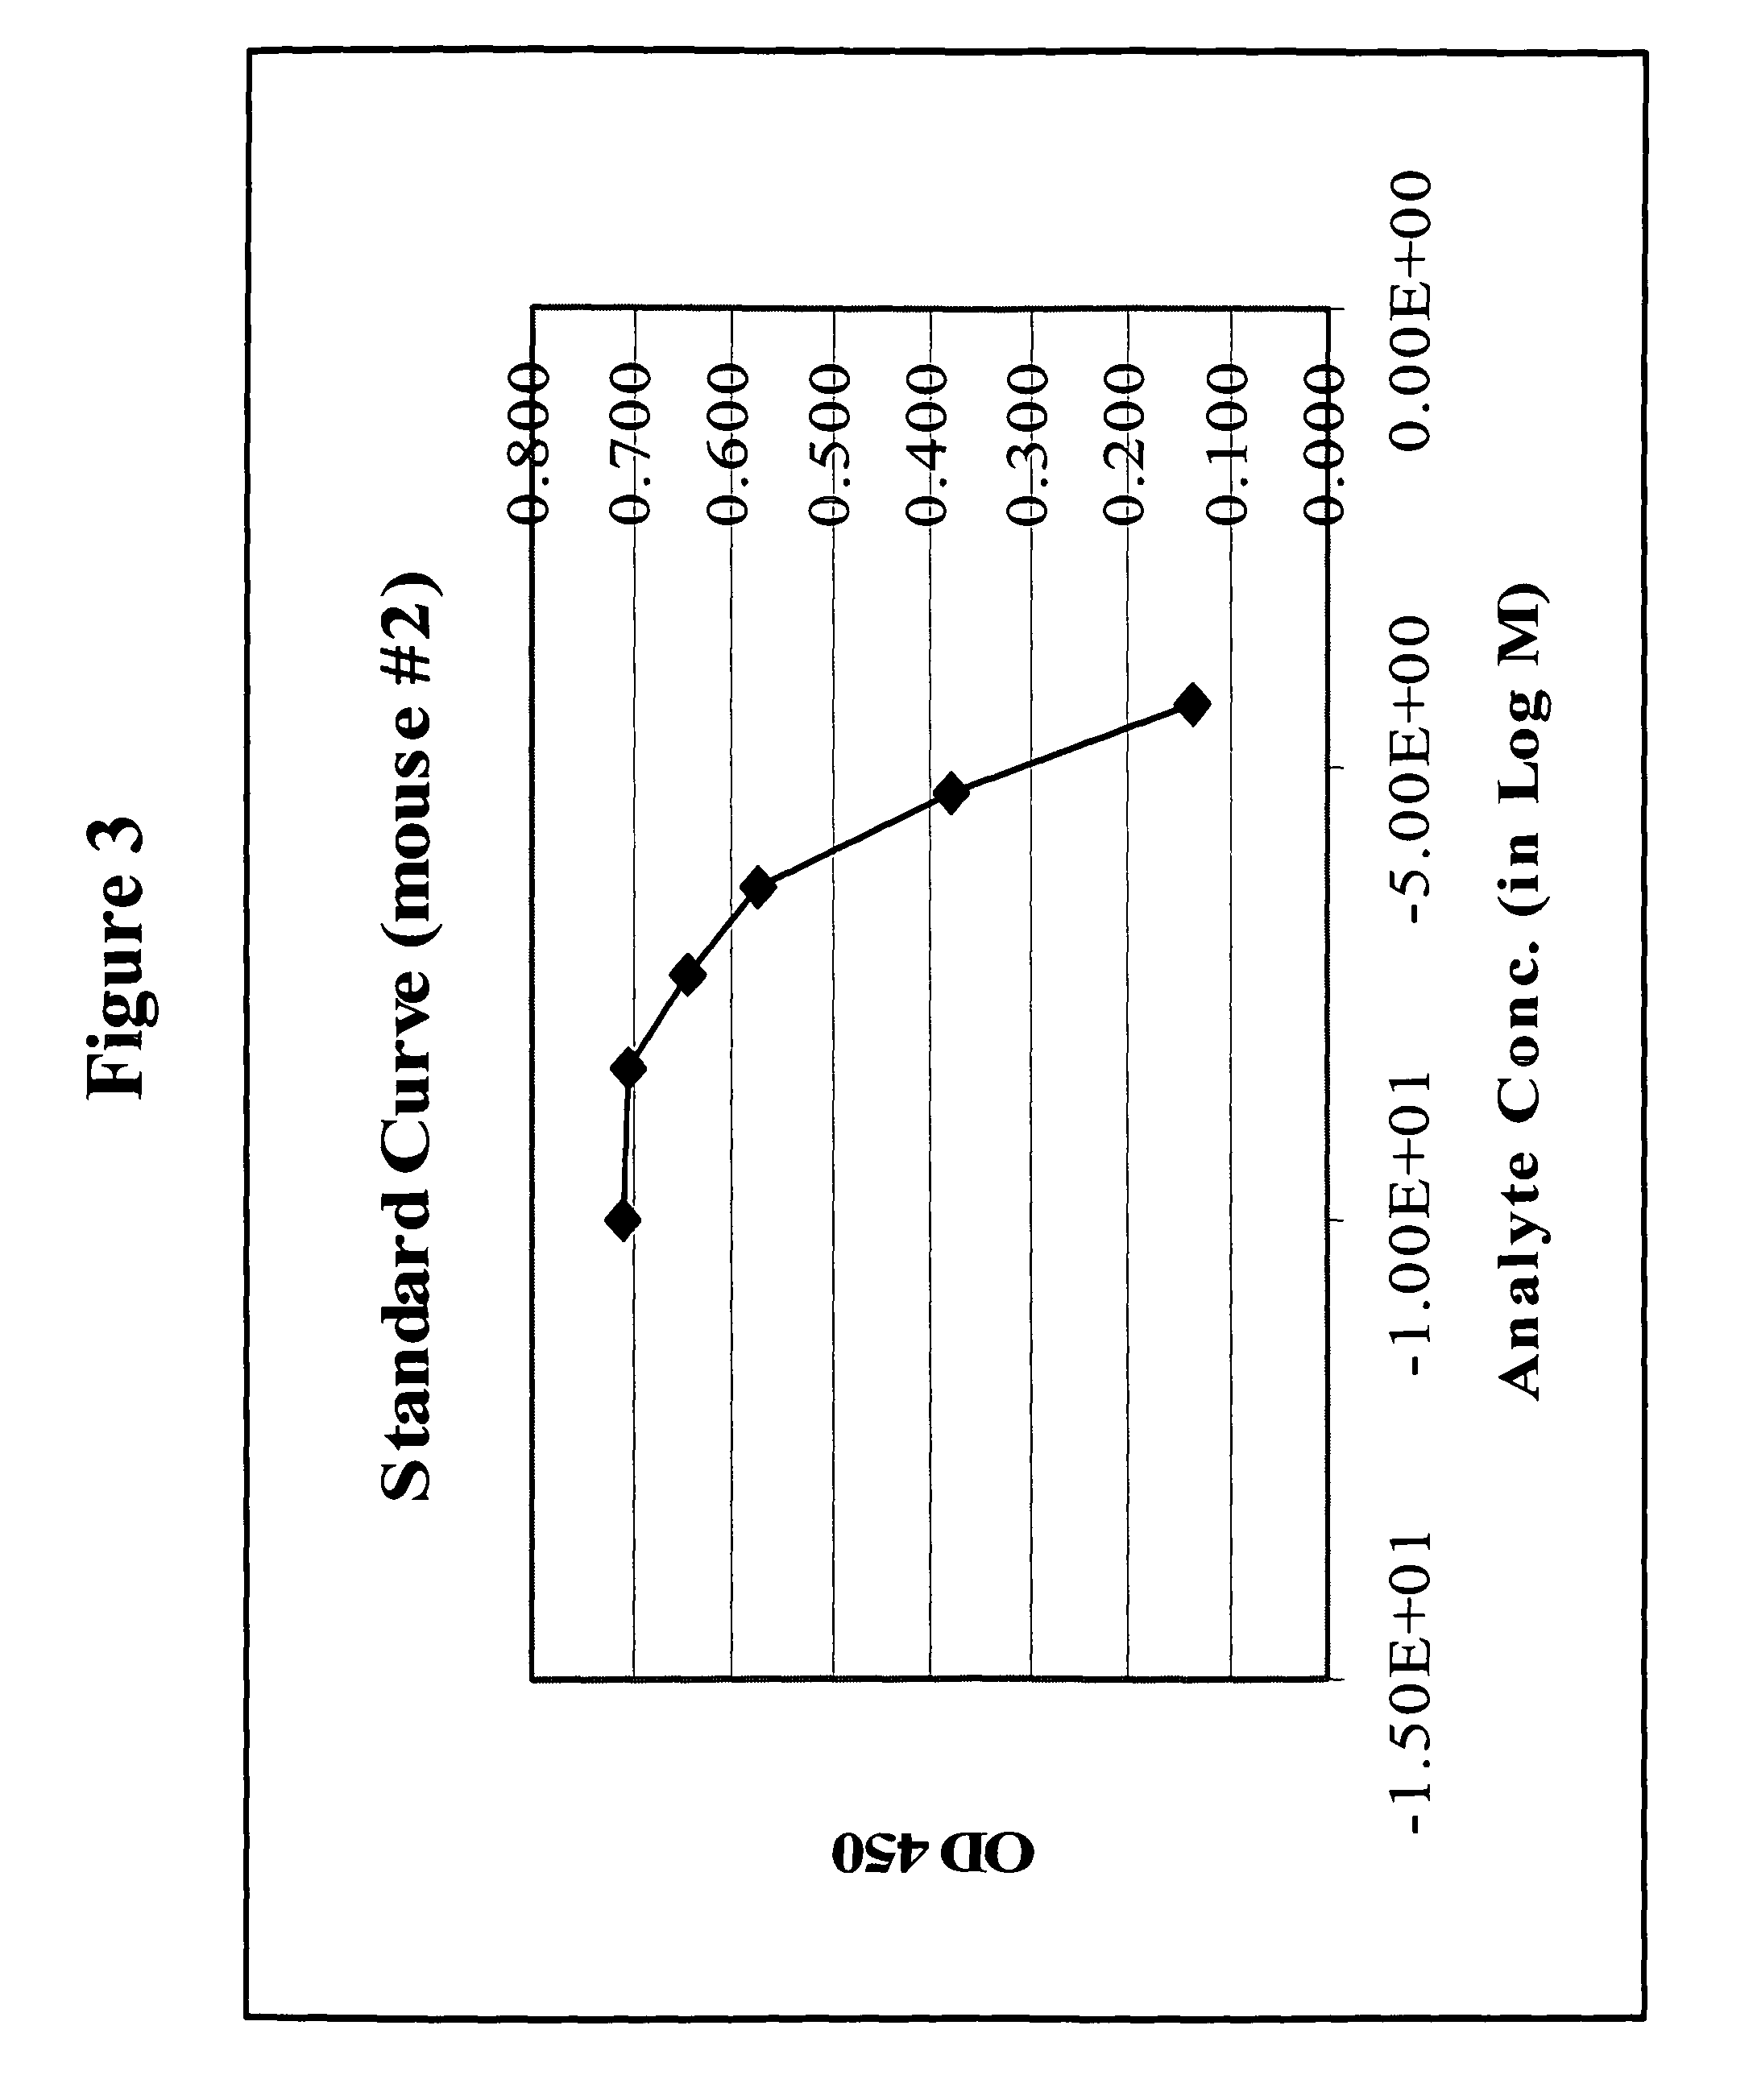 Immunoassay for specific determination of S-adenosylmethionine and analogs thereof in biological samples